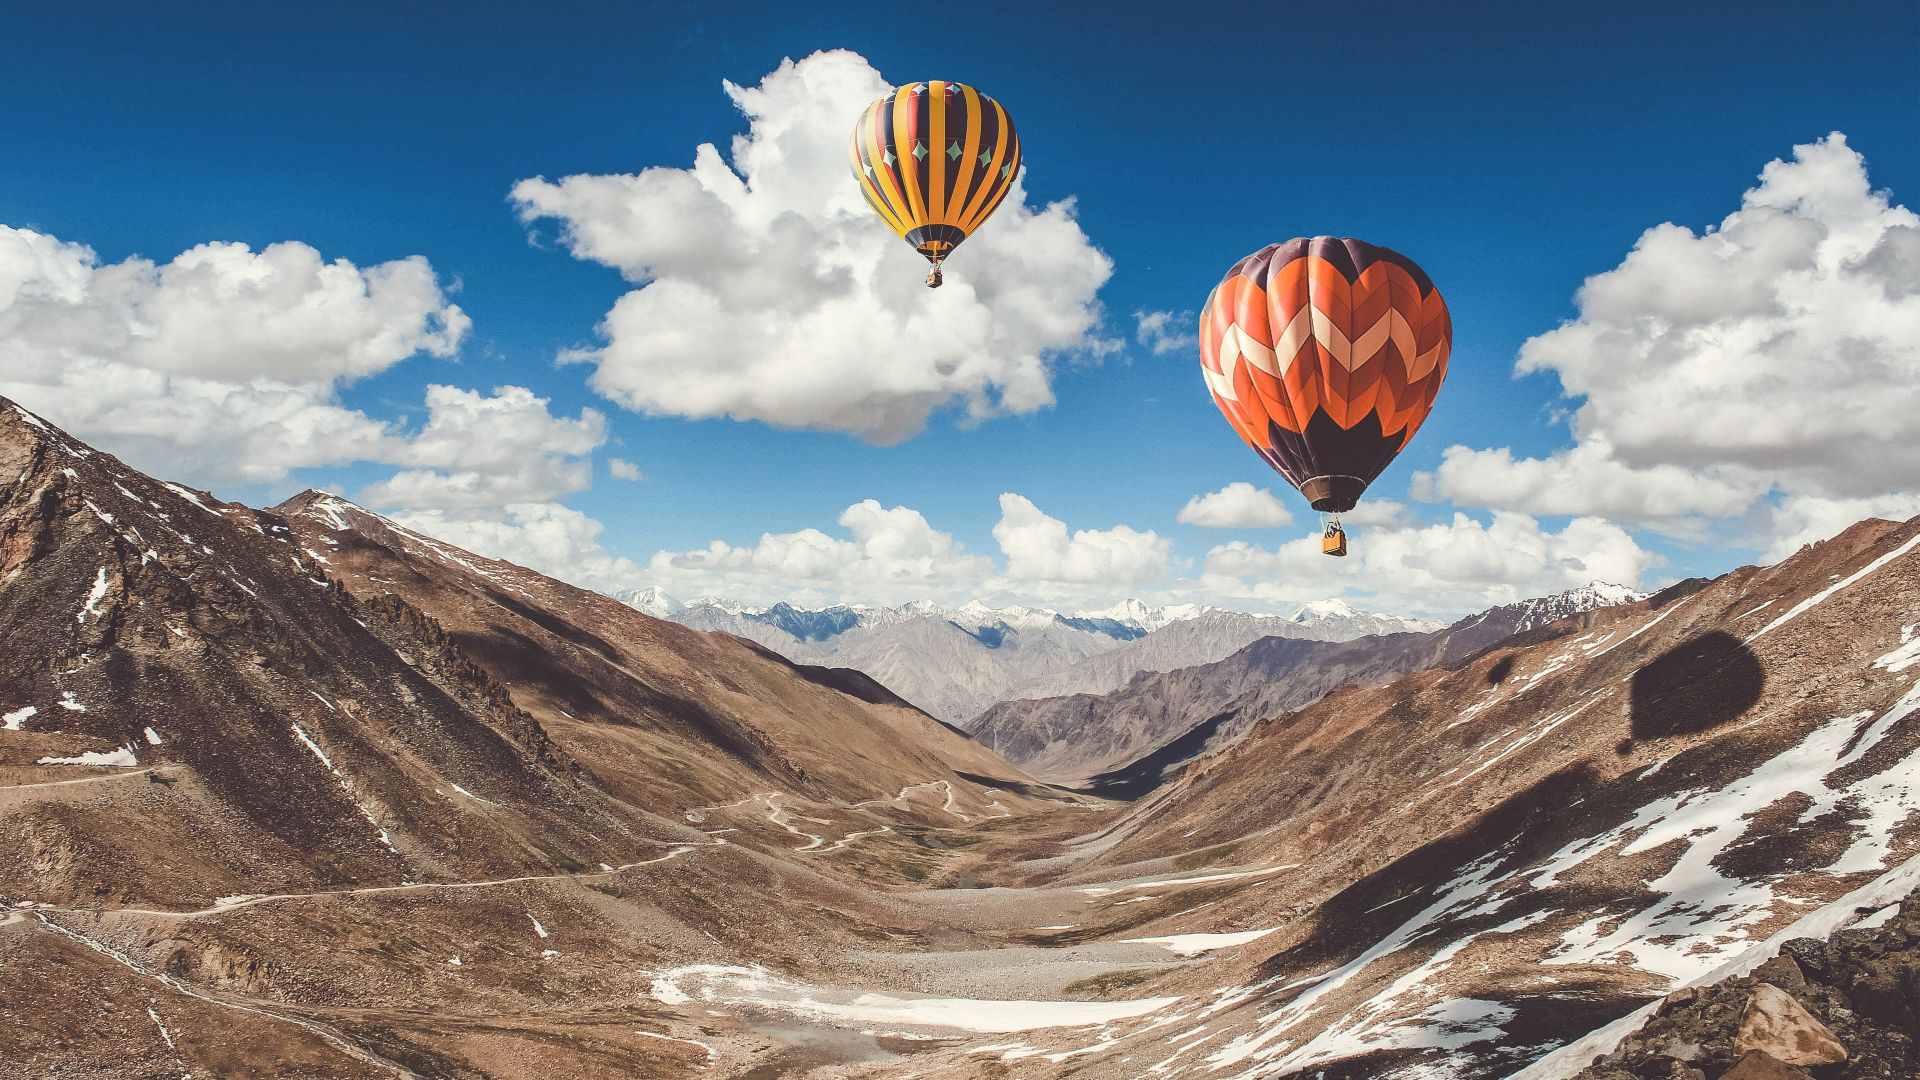 Desktop Wallpaper Hot Air Balloon, Ride In Leh, Mountains, 4k, Hd Image,  Picture, Background, 9ed8c1